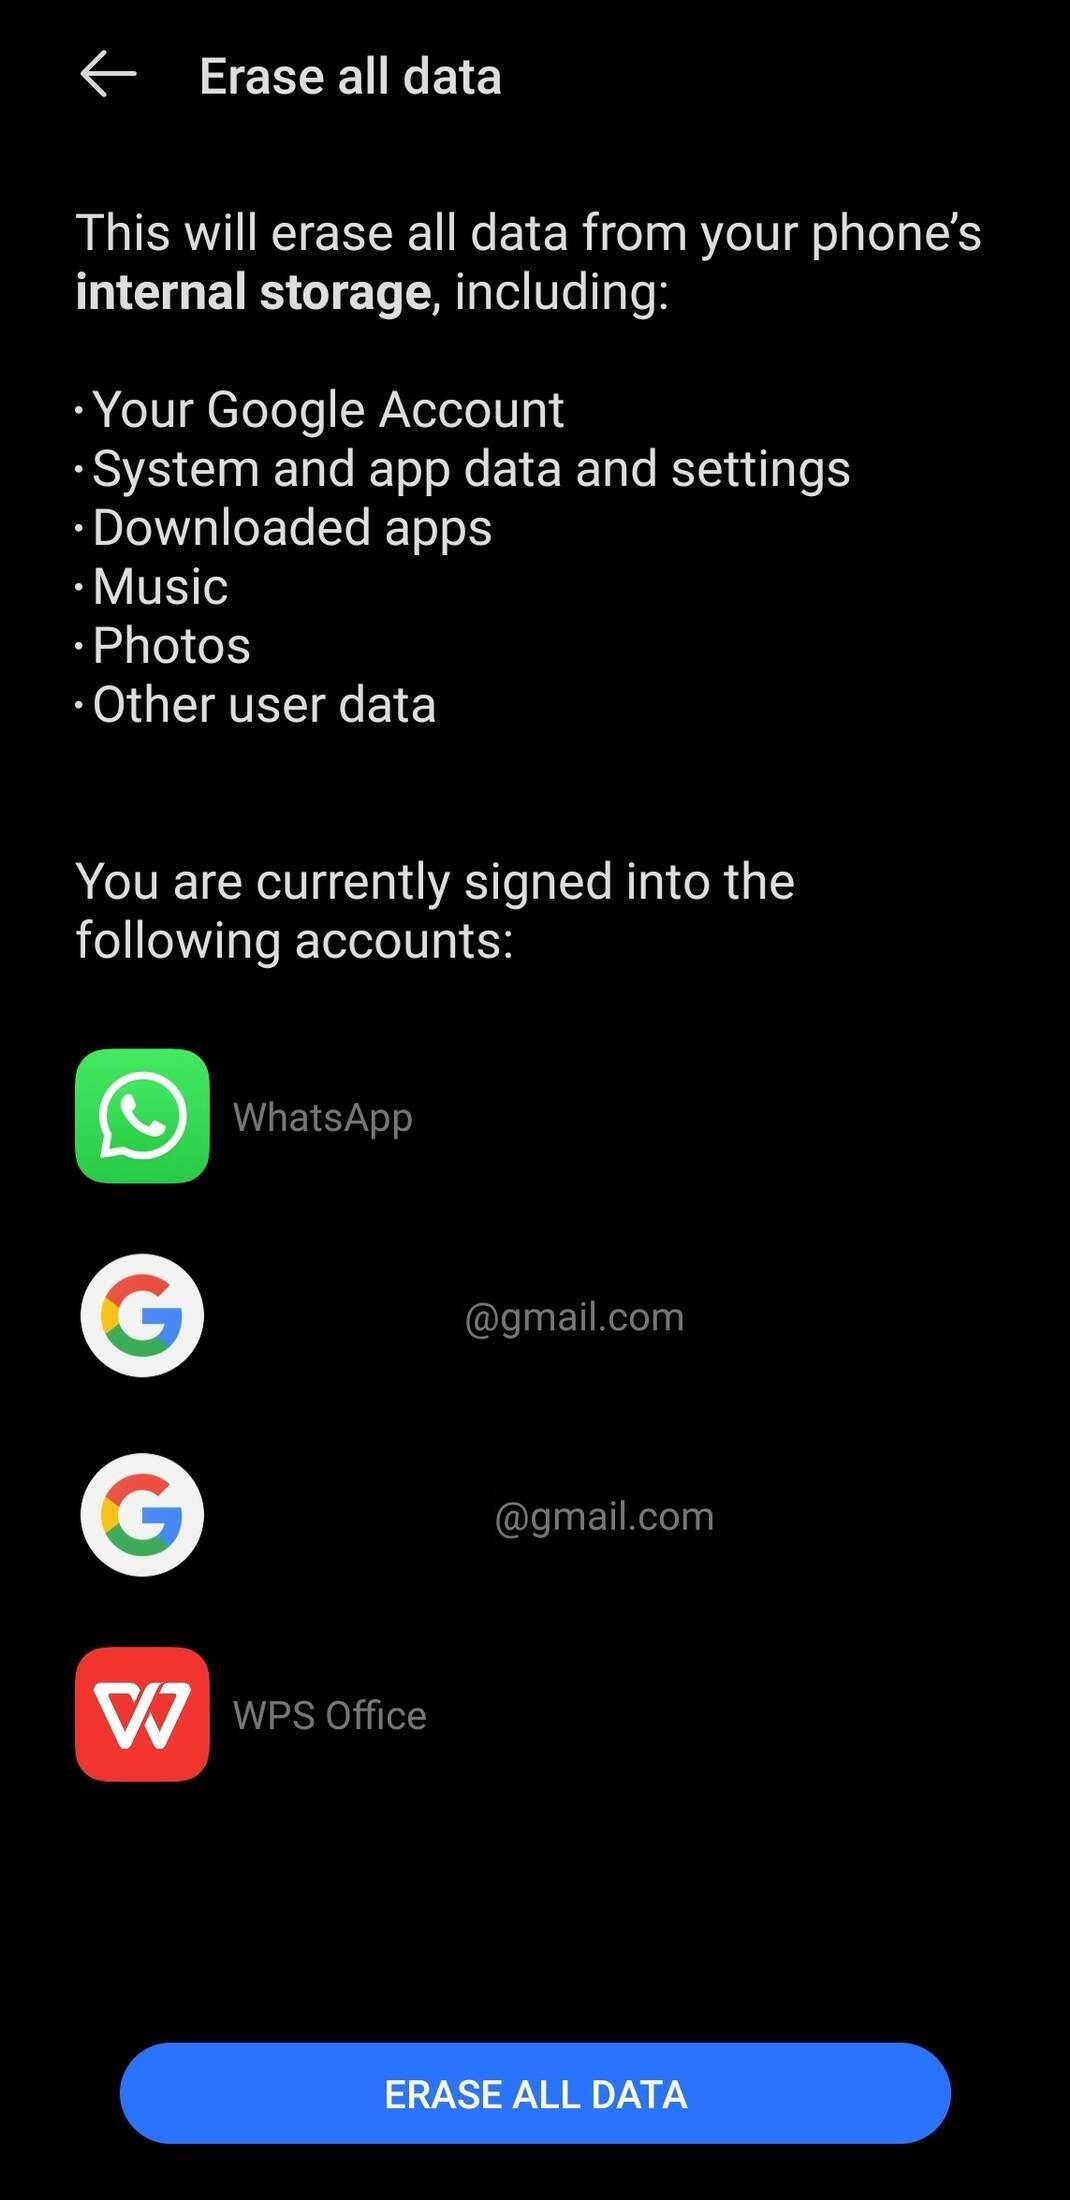 The system asks for confirmation to delete WhatsApp, Gmail, and all other data